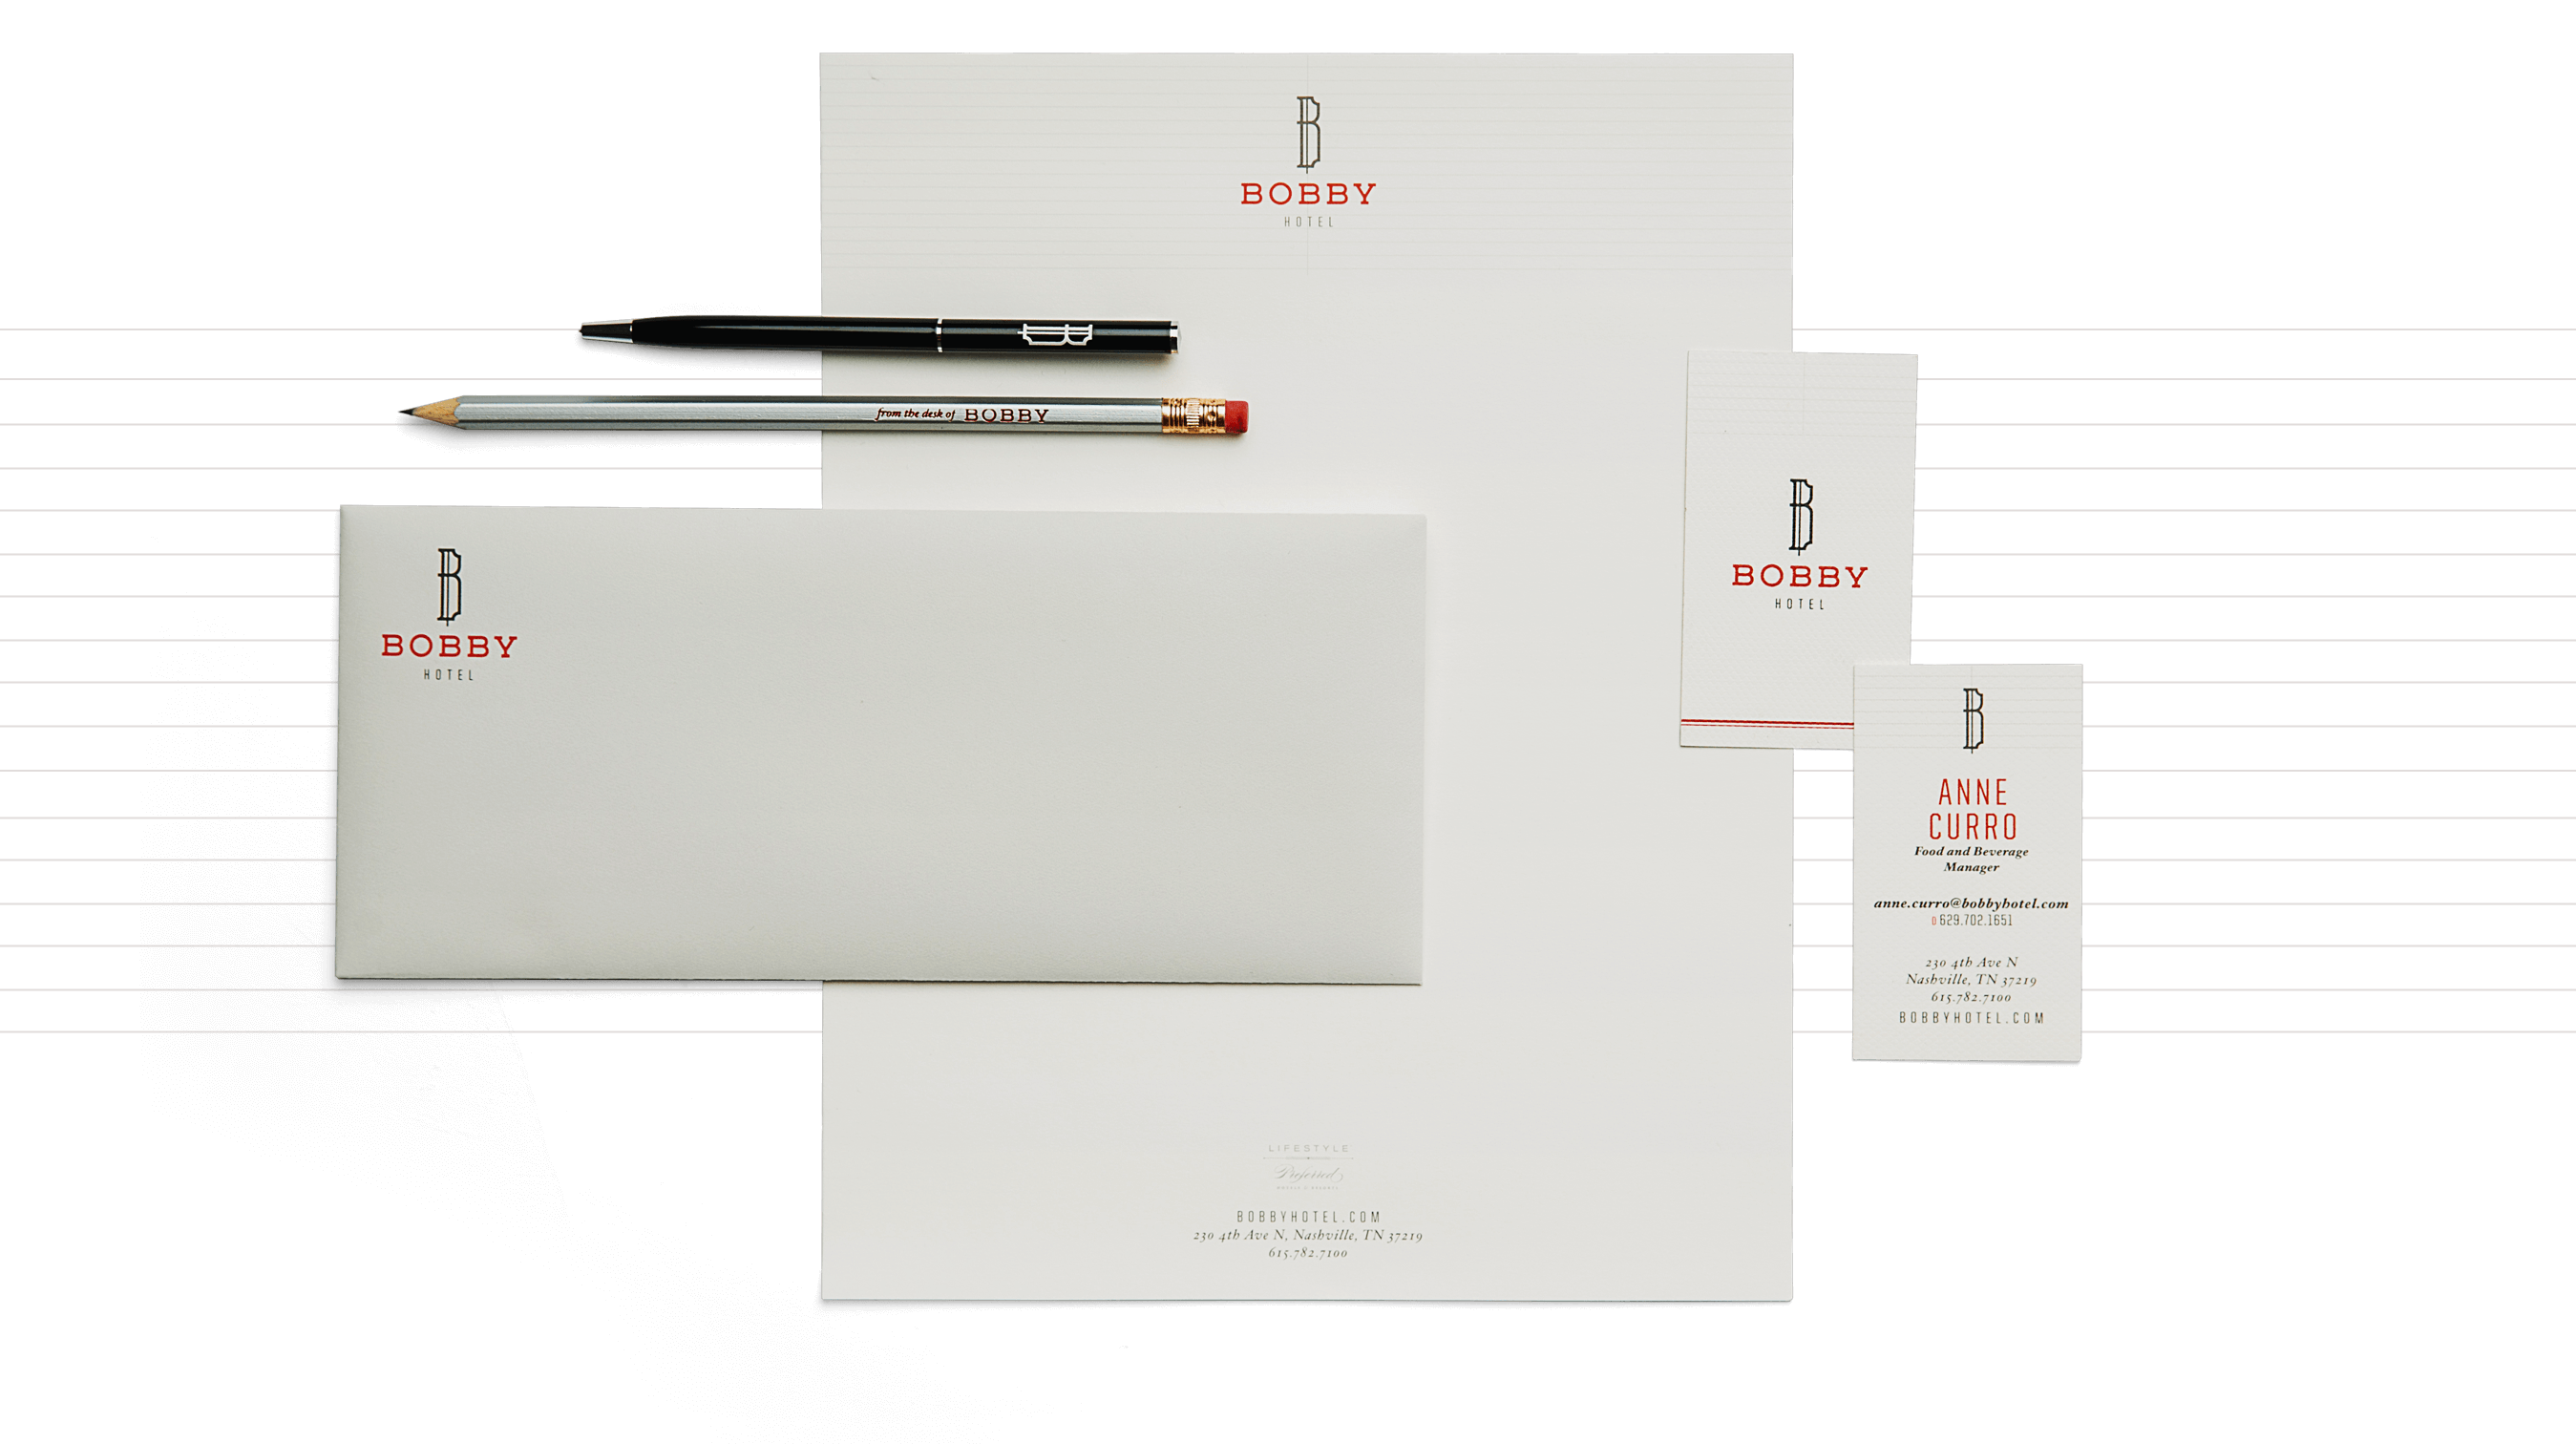 Bobby Hotel corporate stationery including business cards, notecard, letterhead and pin